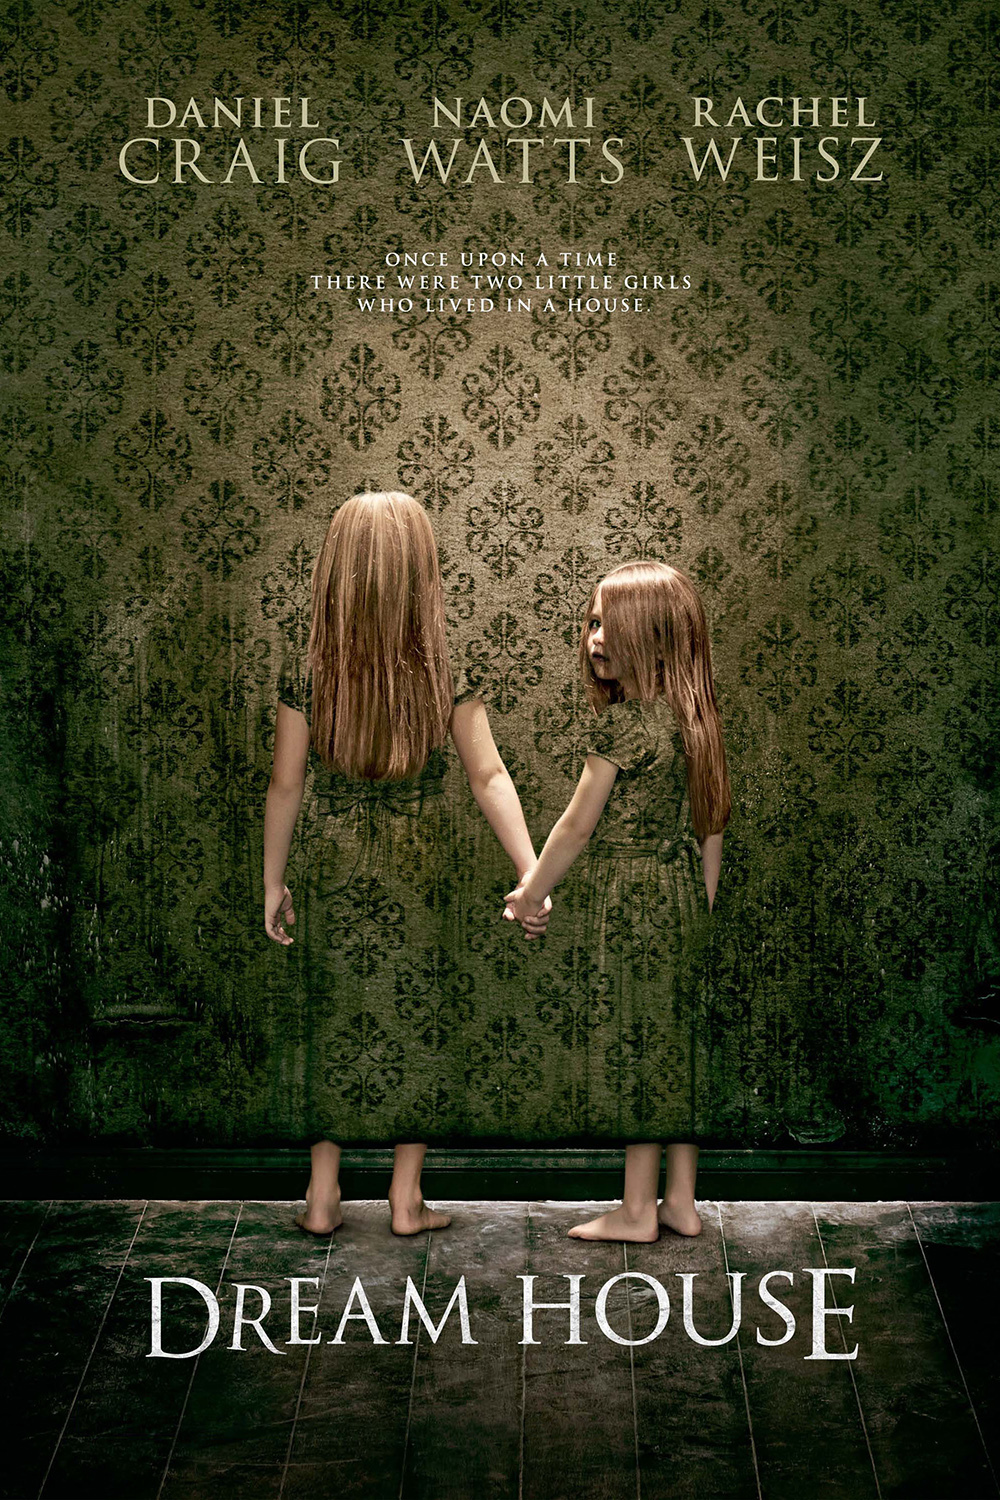 Poster for the movie "Dream House"